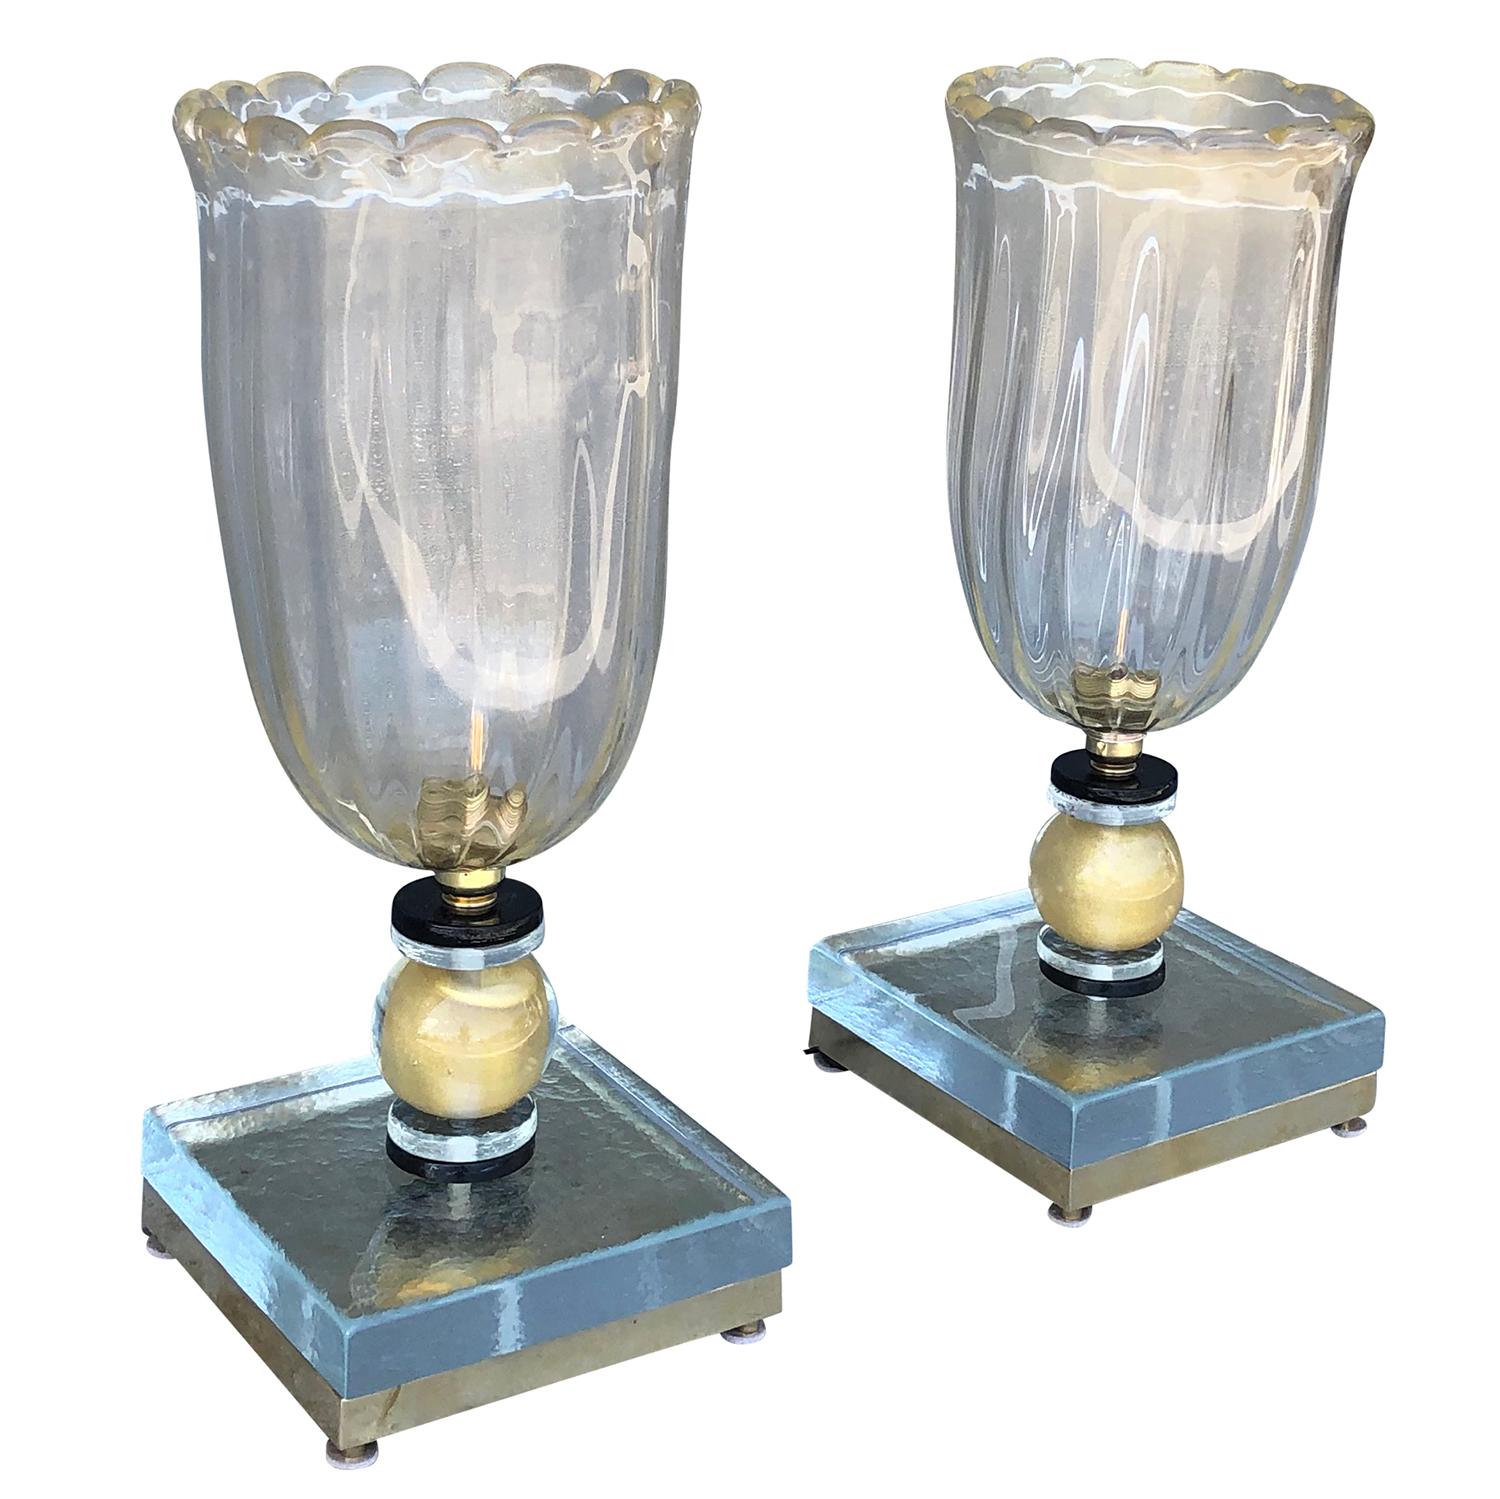 An Italian pair of vintage Mid-Century Modern table lamps. Both lamps are made of lightly frosted, hand-blown Murano glass, one light socket. These elegant, authentic modern Mid-Century table lamps can be used in an office, as bedside lamps, or in a